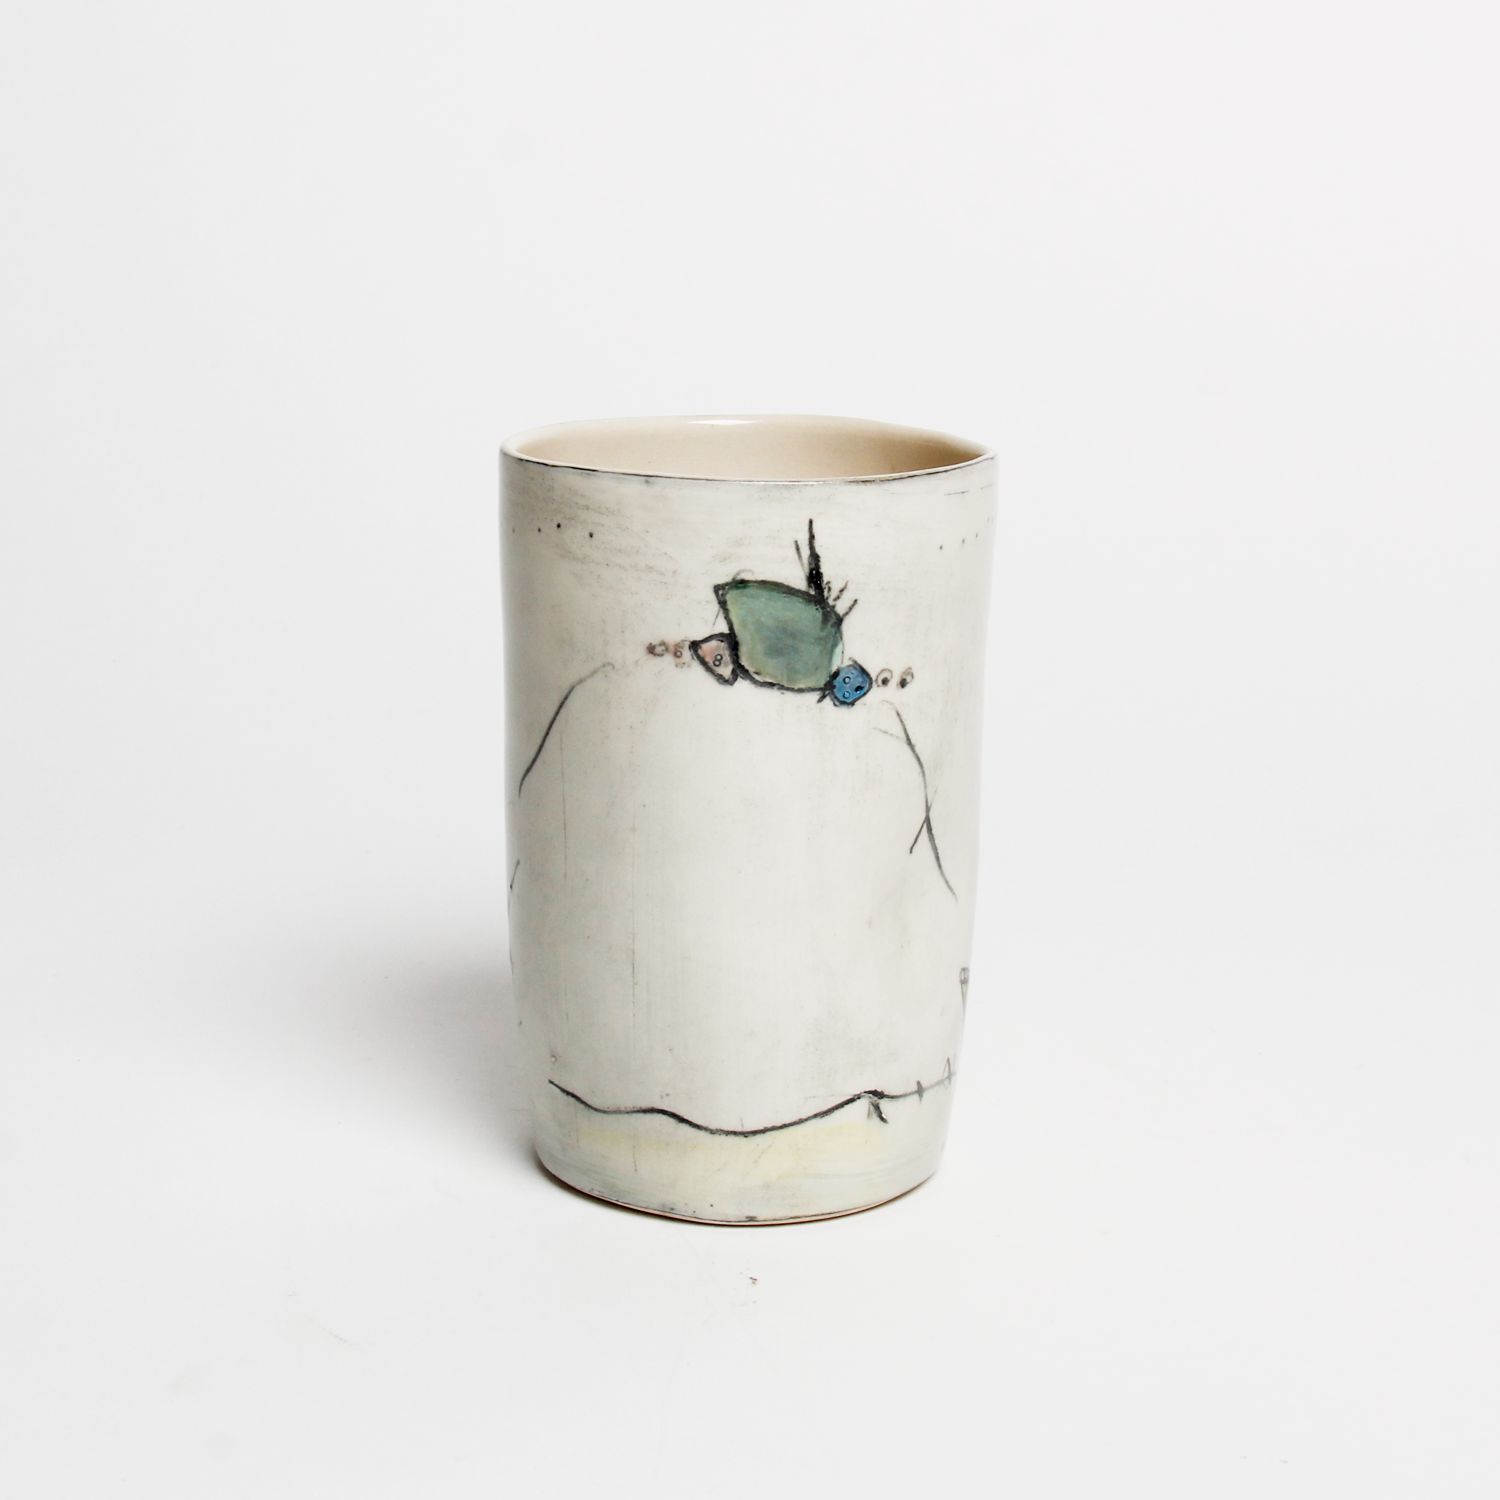 Stephen Hawes: Tall Cup Product Image 3 of 4